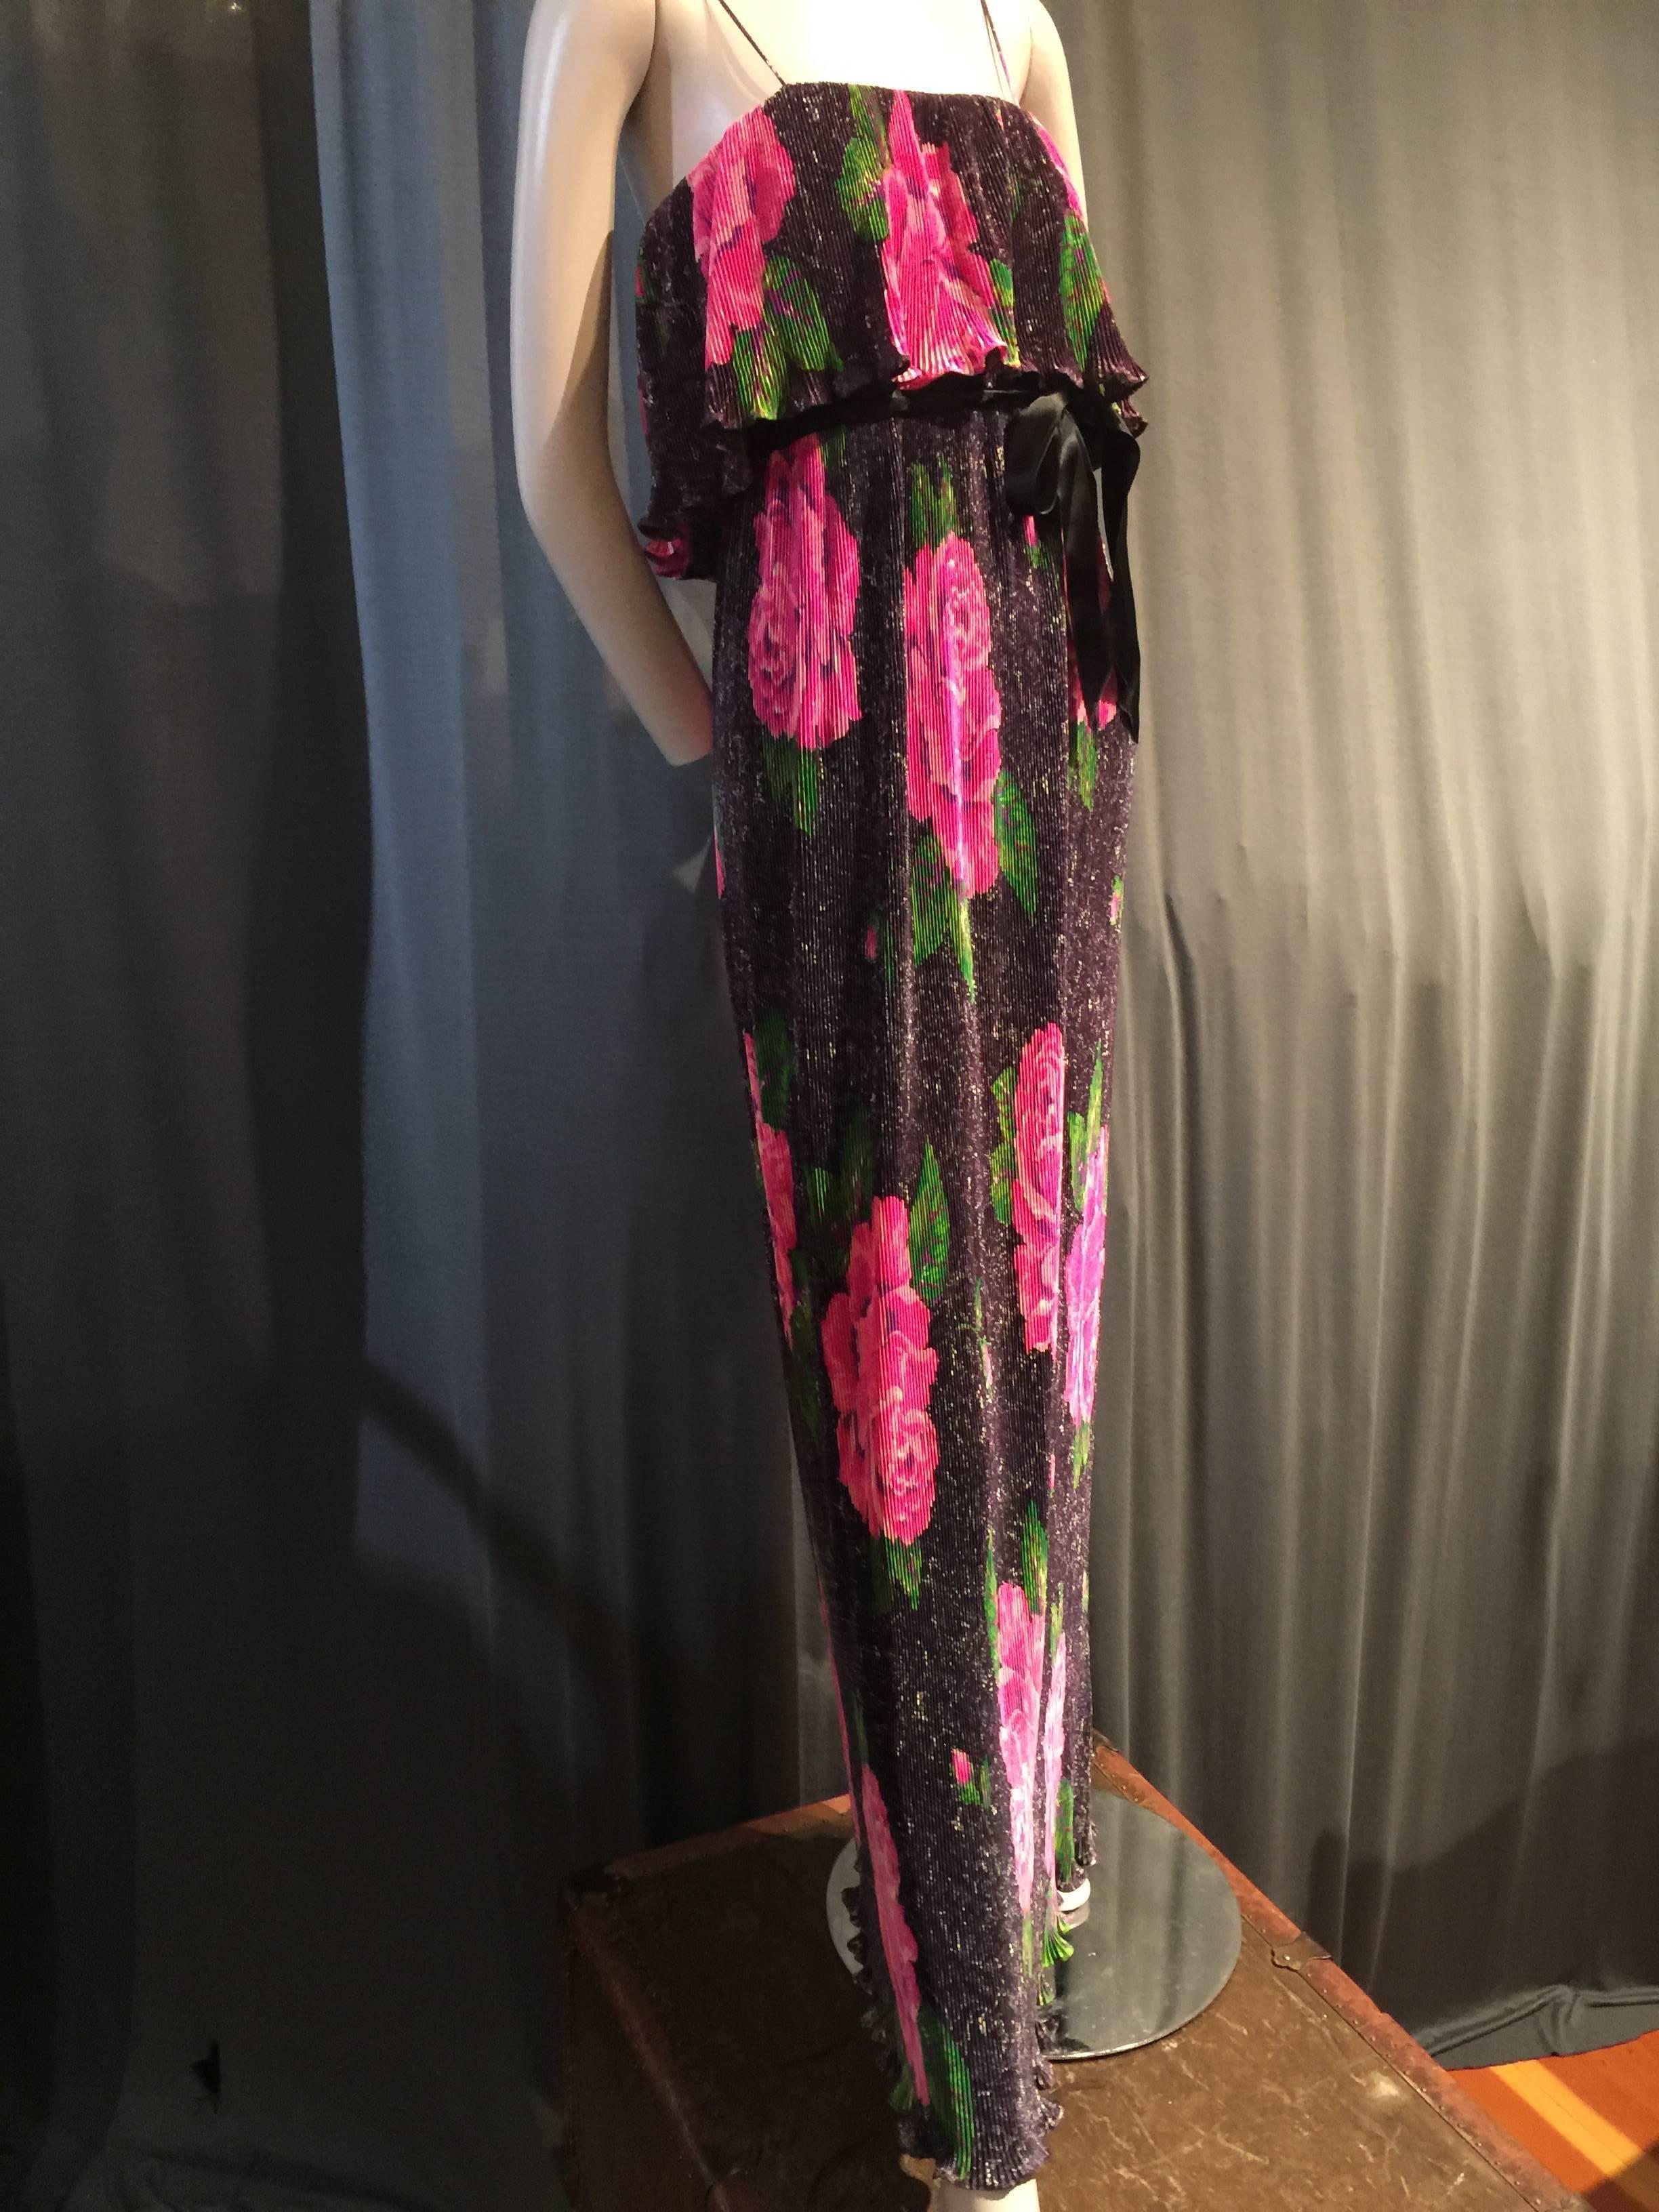 A lovely 1970s Bonwit Teller accordion pleated maxi gown in a sleek synthetic with a pixelated rose print. Spaghetti straps with a short tier of ruffle on bodice and a velvet sash at waist.